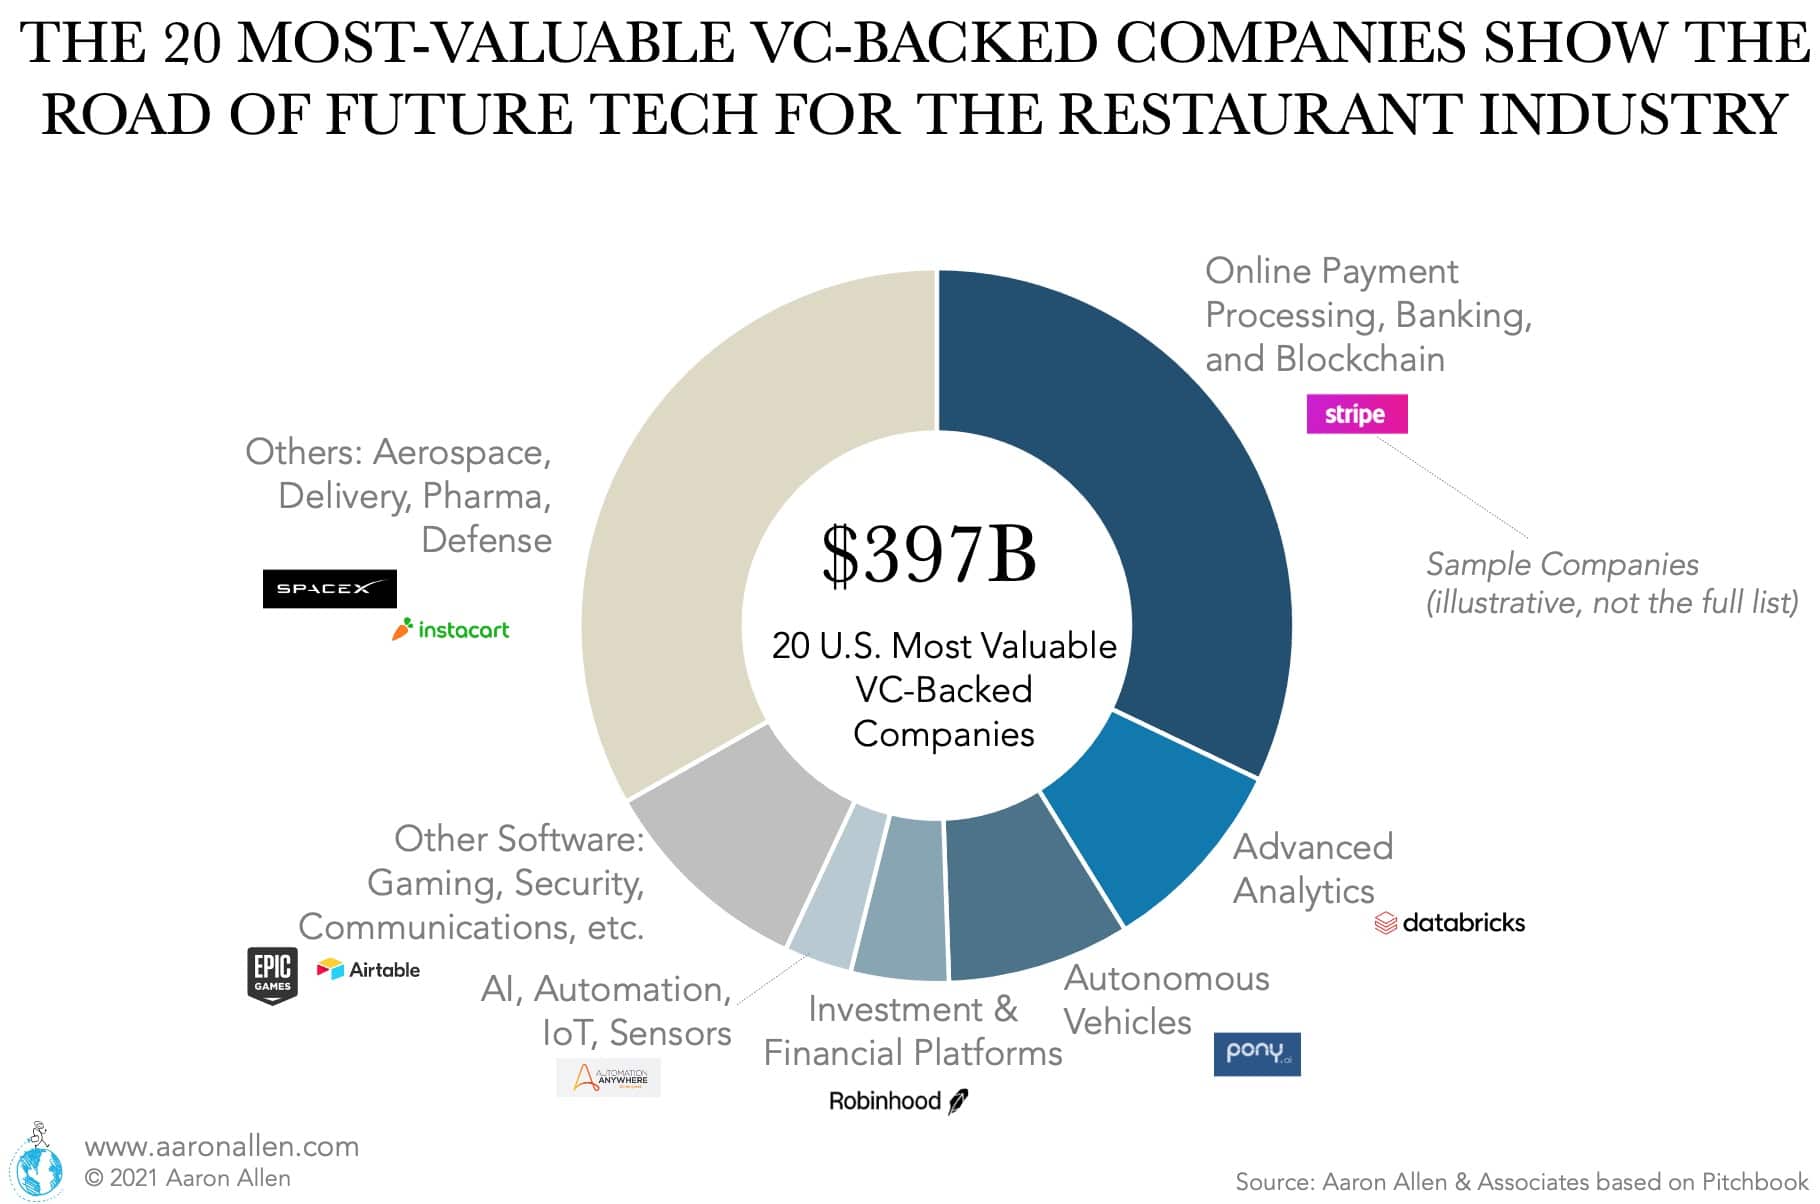 The 20 most valuable VC-backed companies in the U.S. are worth close to $400 billion. Their distribution across segments can be taken as a proxy (and inspiration) for what technologies are going to have an impact in the foodservice industry over the next few years. While Online Payment Processing and Blockchain companies take the largest share (representing close to a third of the value), Advanced Analytics, Autonomous Vehicles, AI, Automation, IoT, and Sensors account for 20% of the value of the top 20. When we look at tech, we think “how is this going to make life better for restaurants?” And we have found a couple of gems with a great shot at becoming the most valuable foodservice tech in the world.